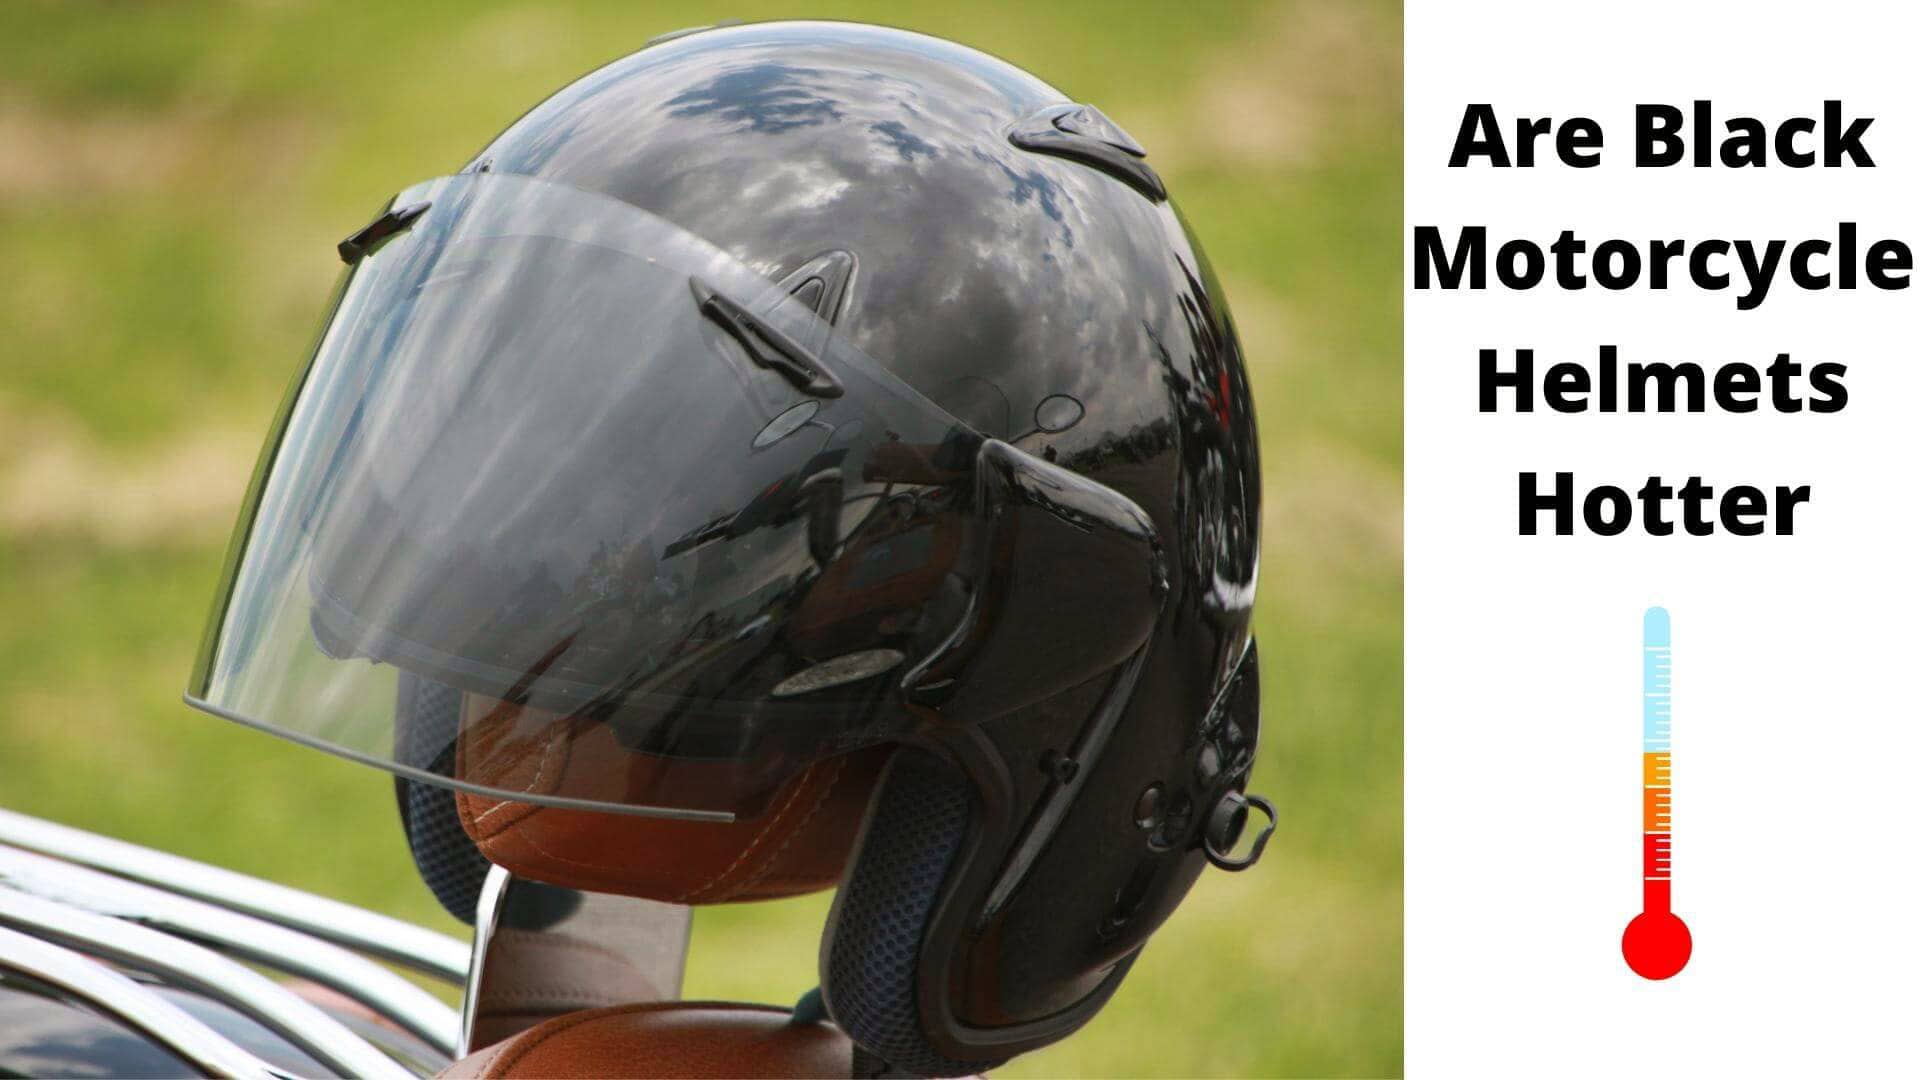 Are Black Motorcycle Helmets Hotter? The Best Option for You